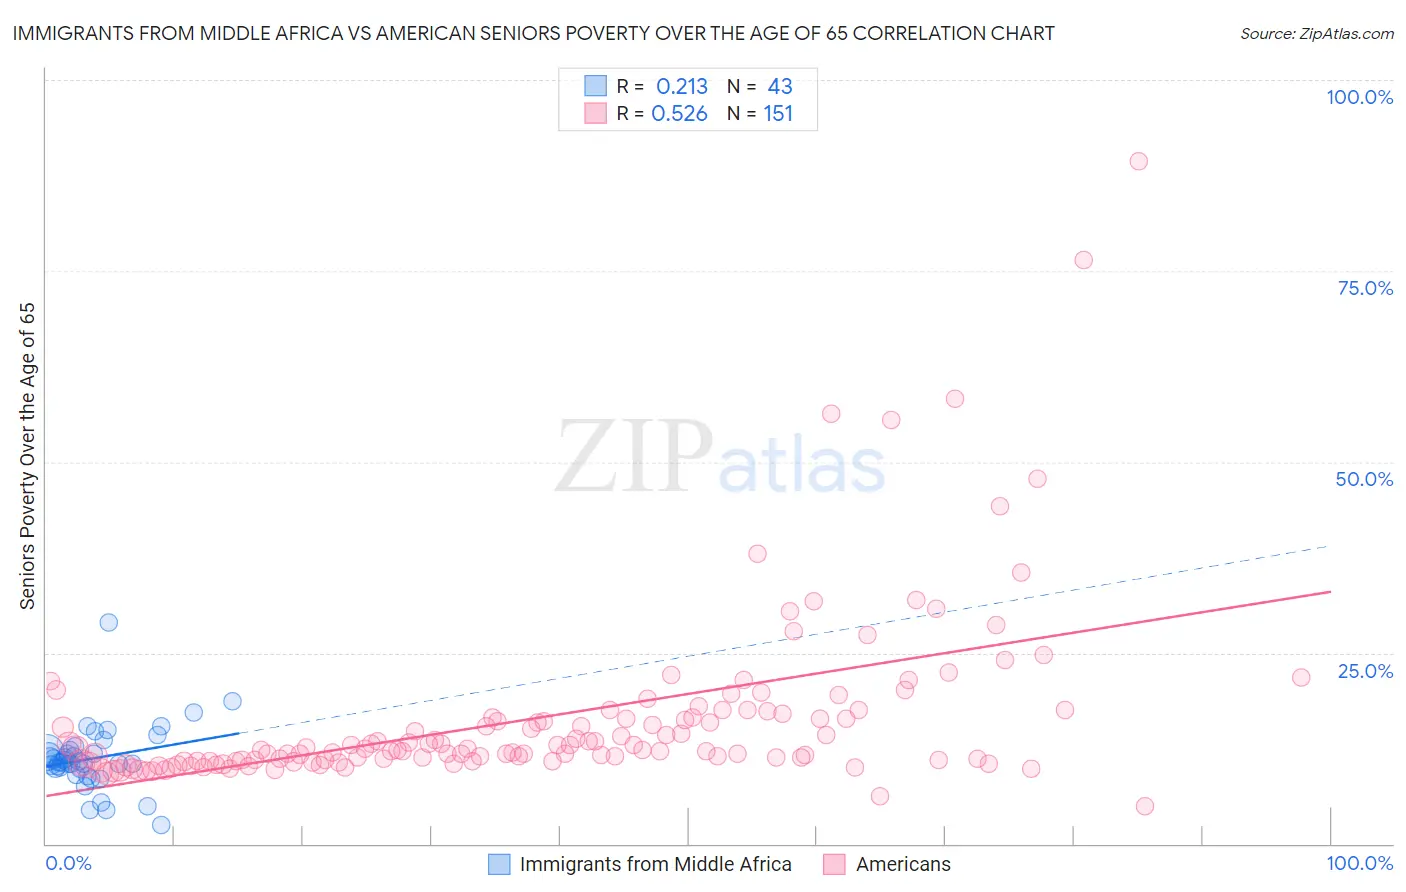 Immigrants from Middle Africa vs American Seniors Poverty Over the Age of 65